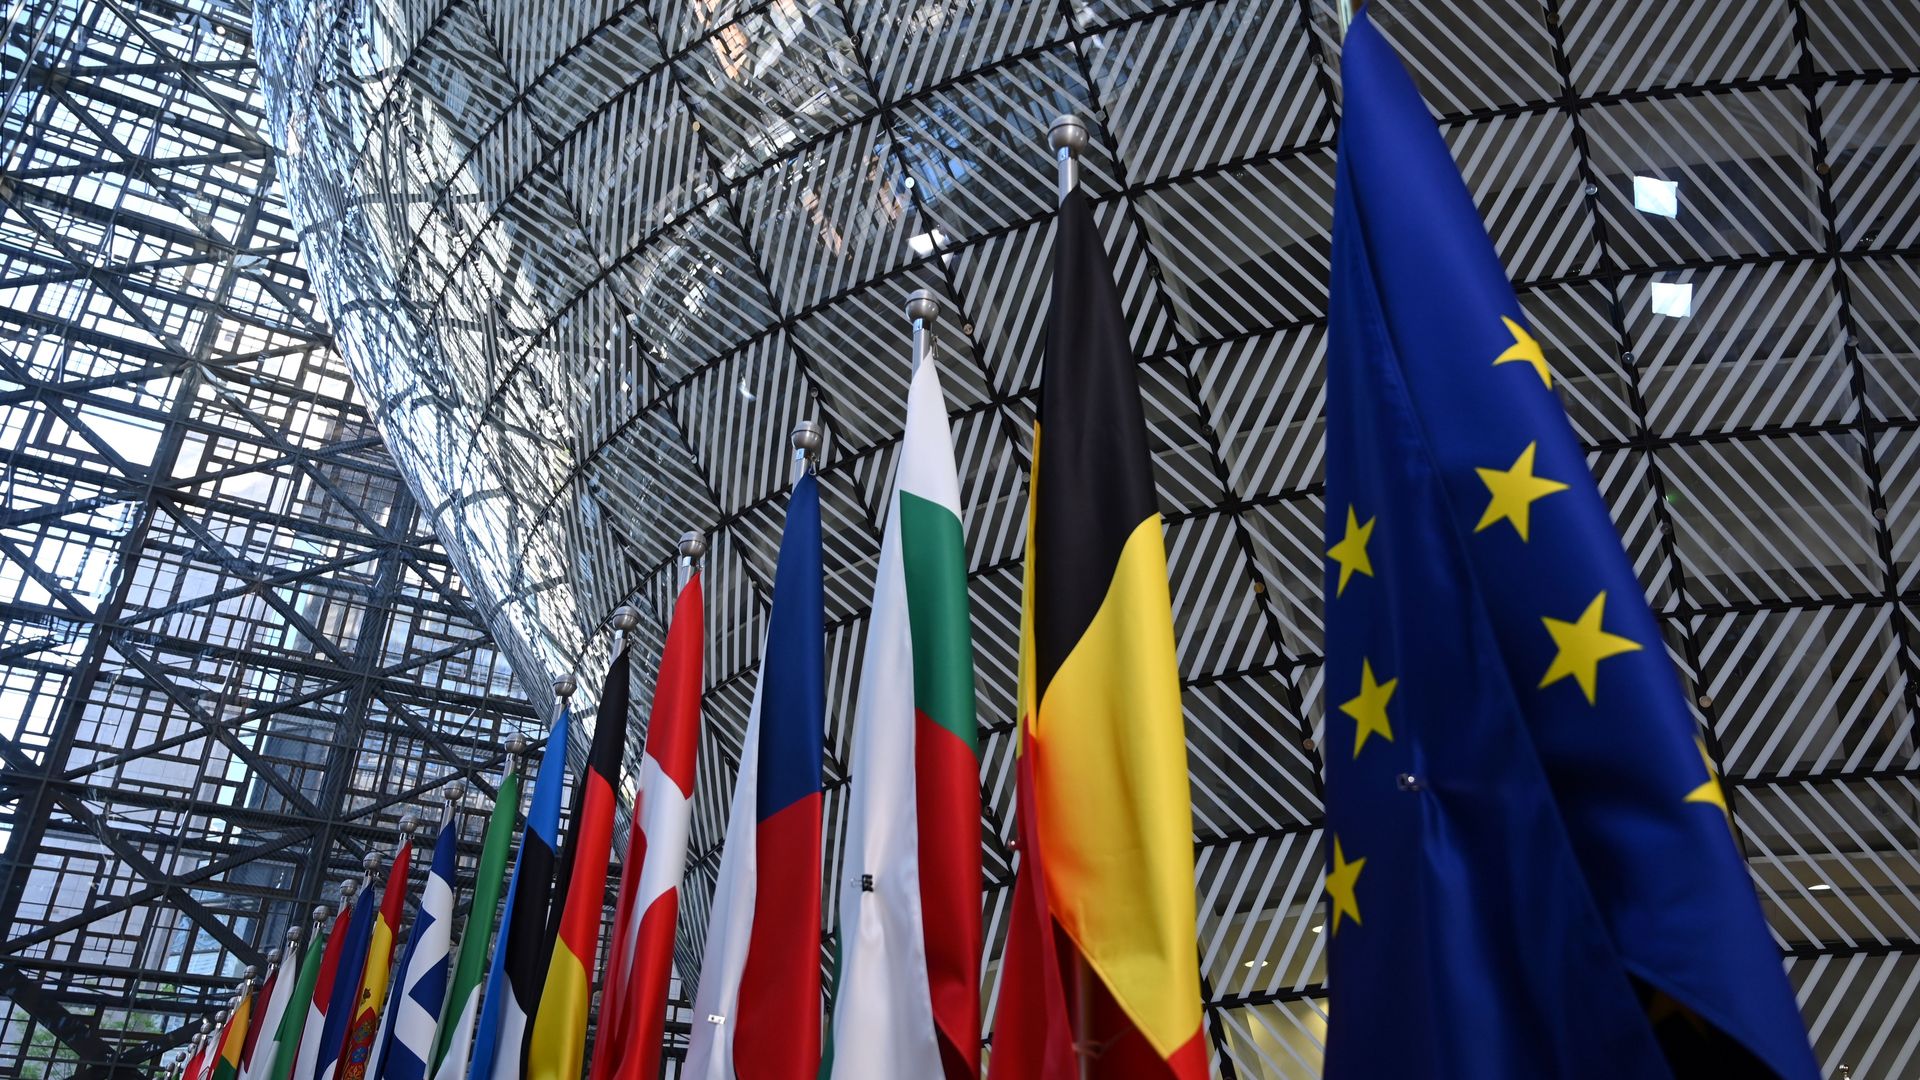 European Council building with European flags displayed